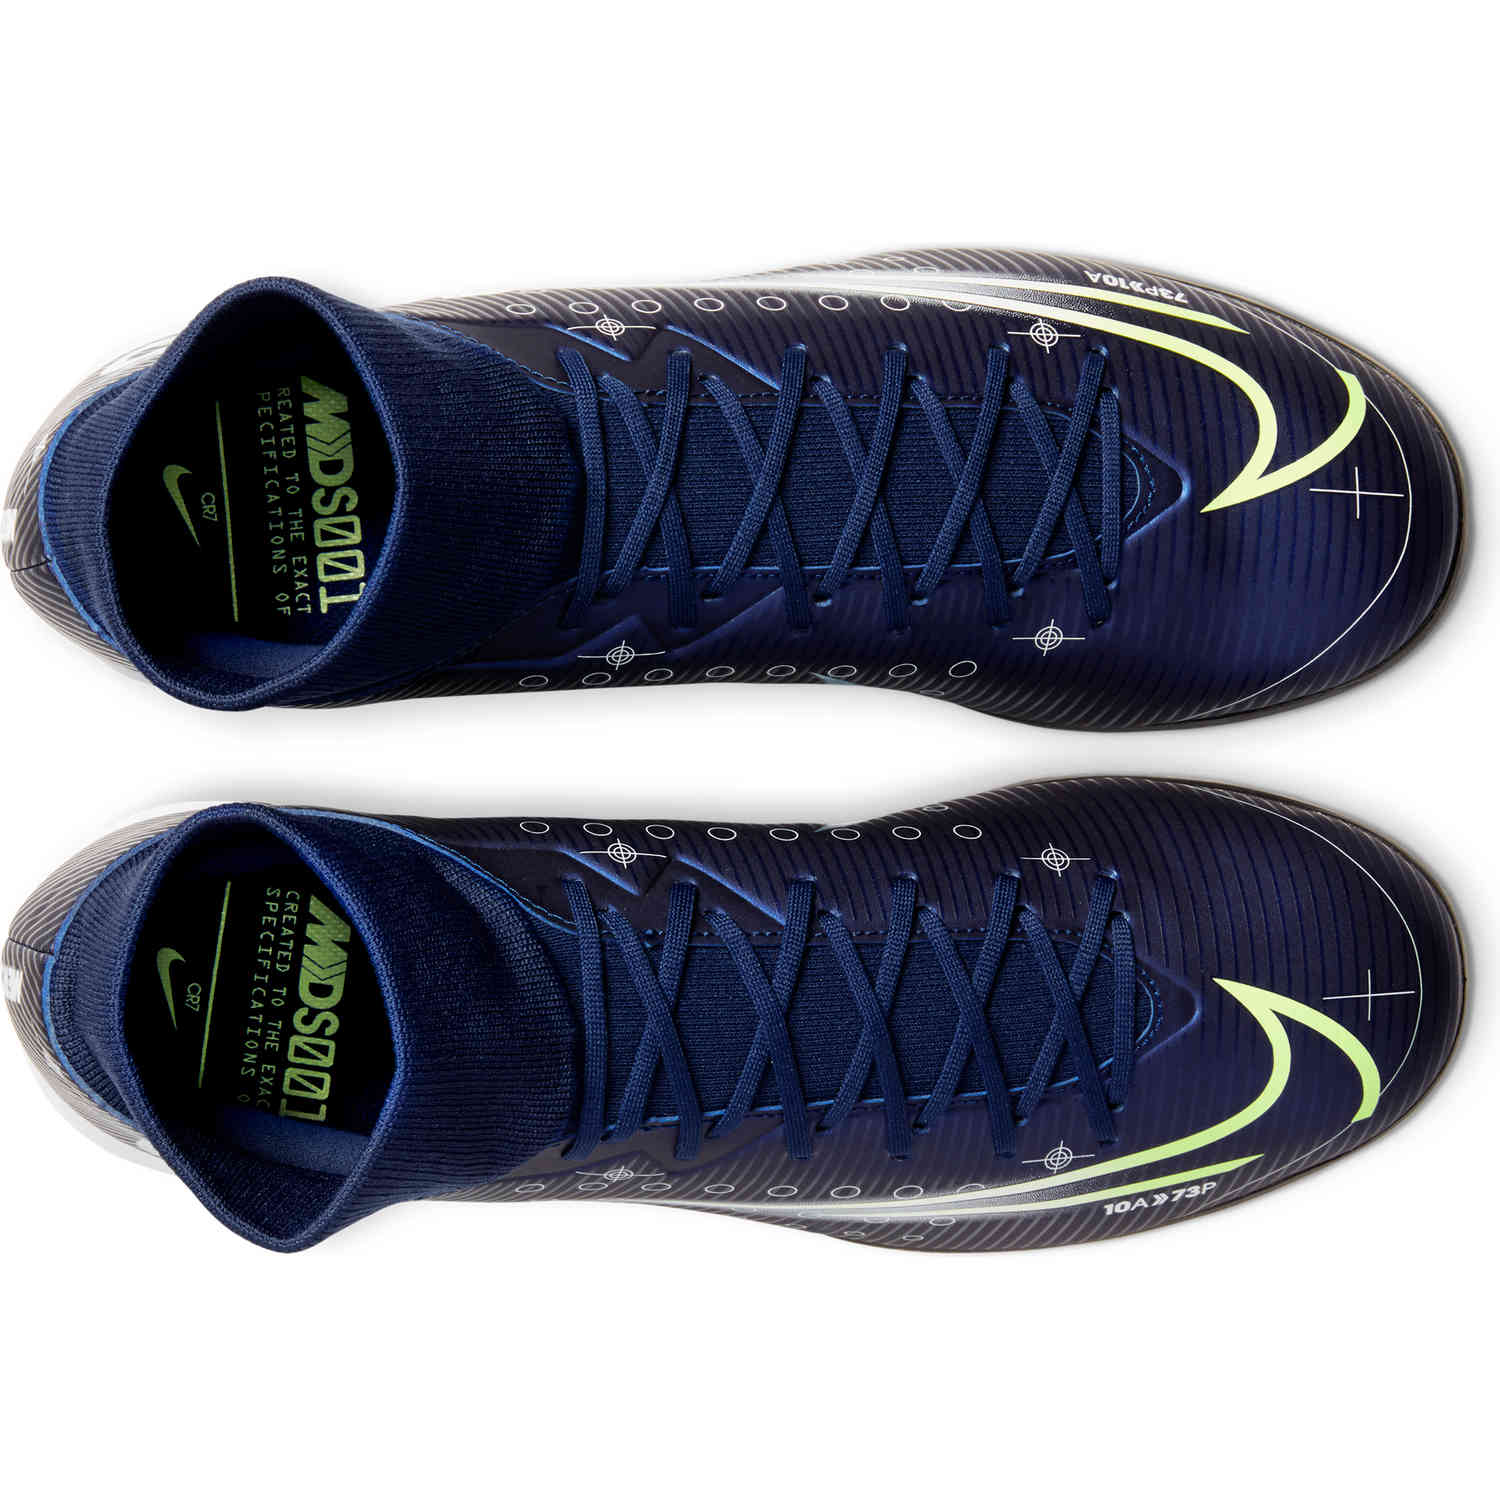 Football Boots New Nike Mercurial Dream Speed 001 What .